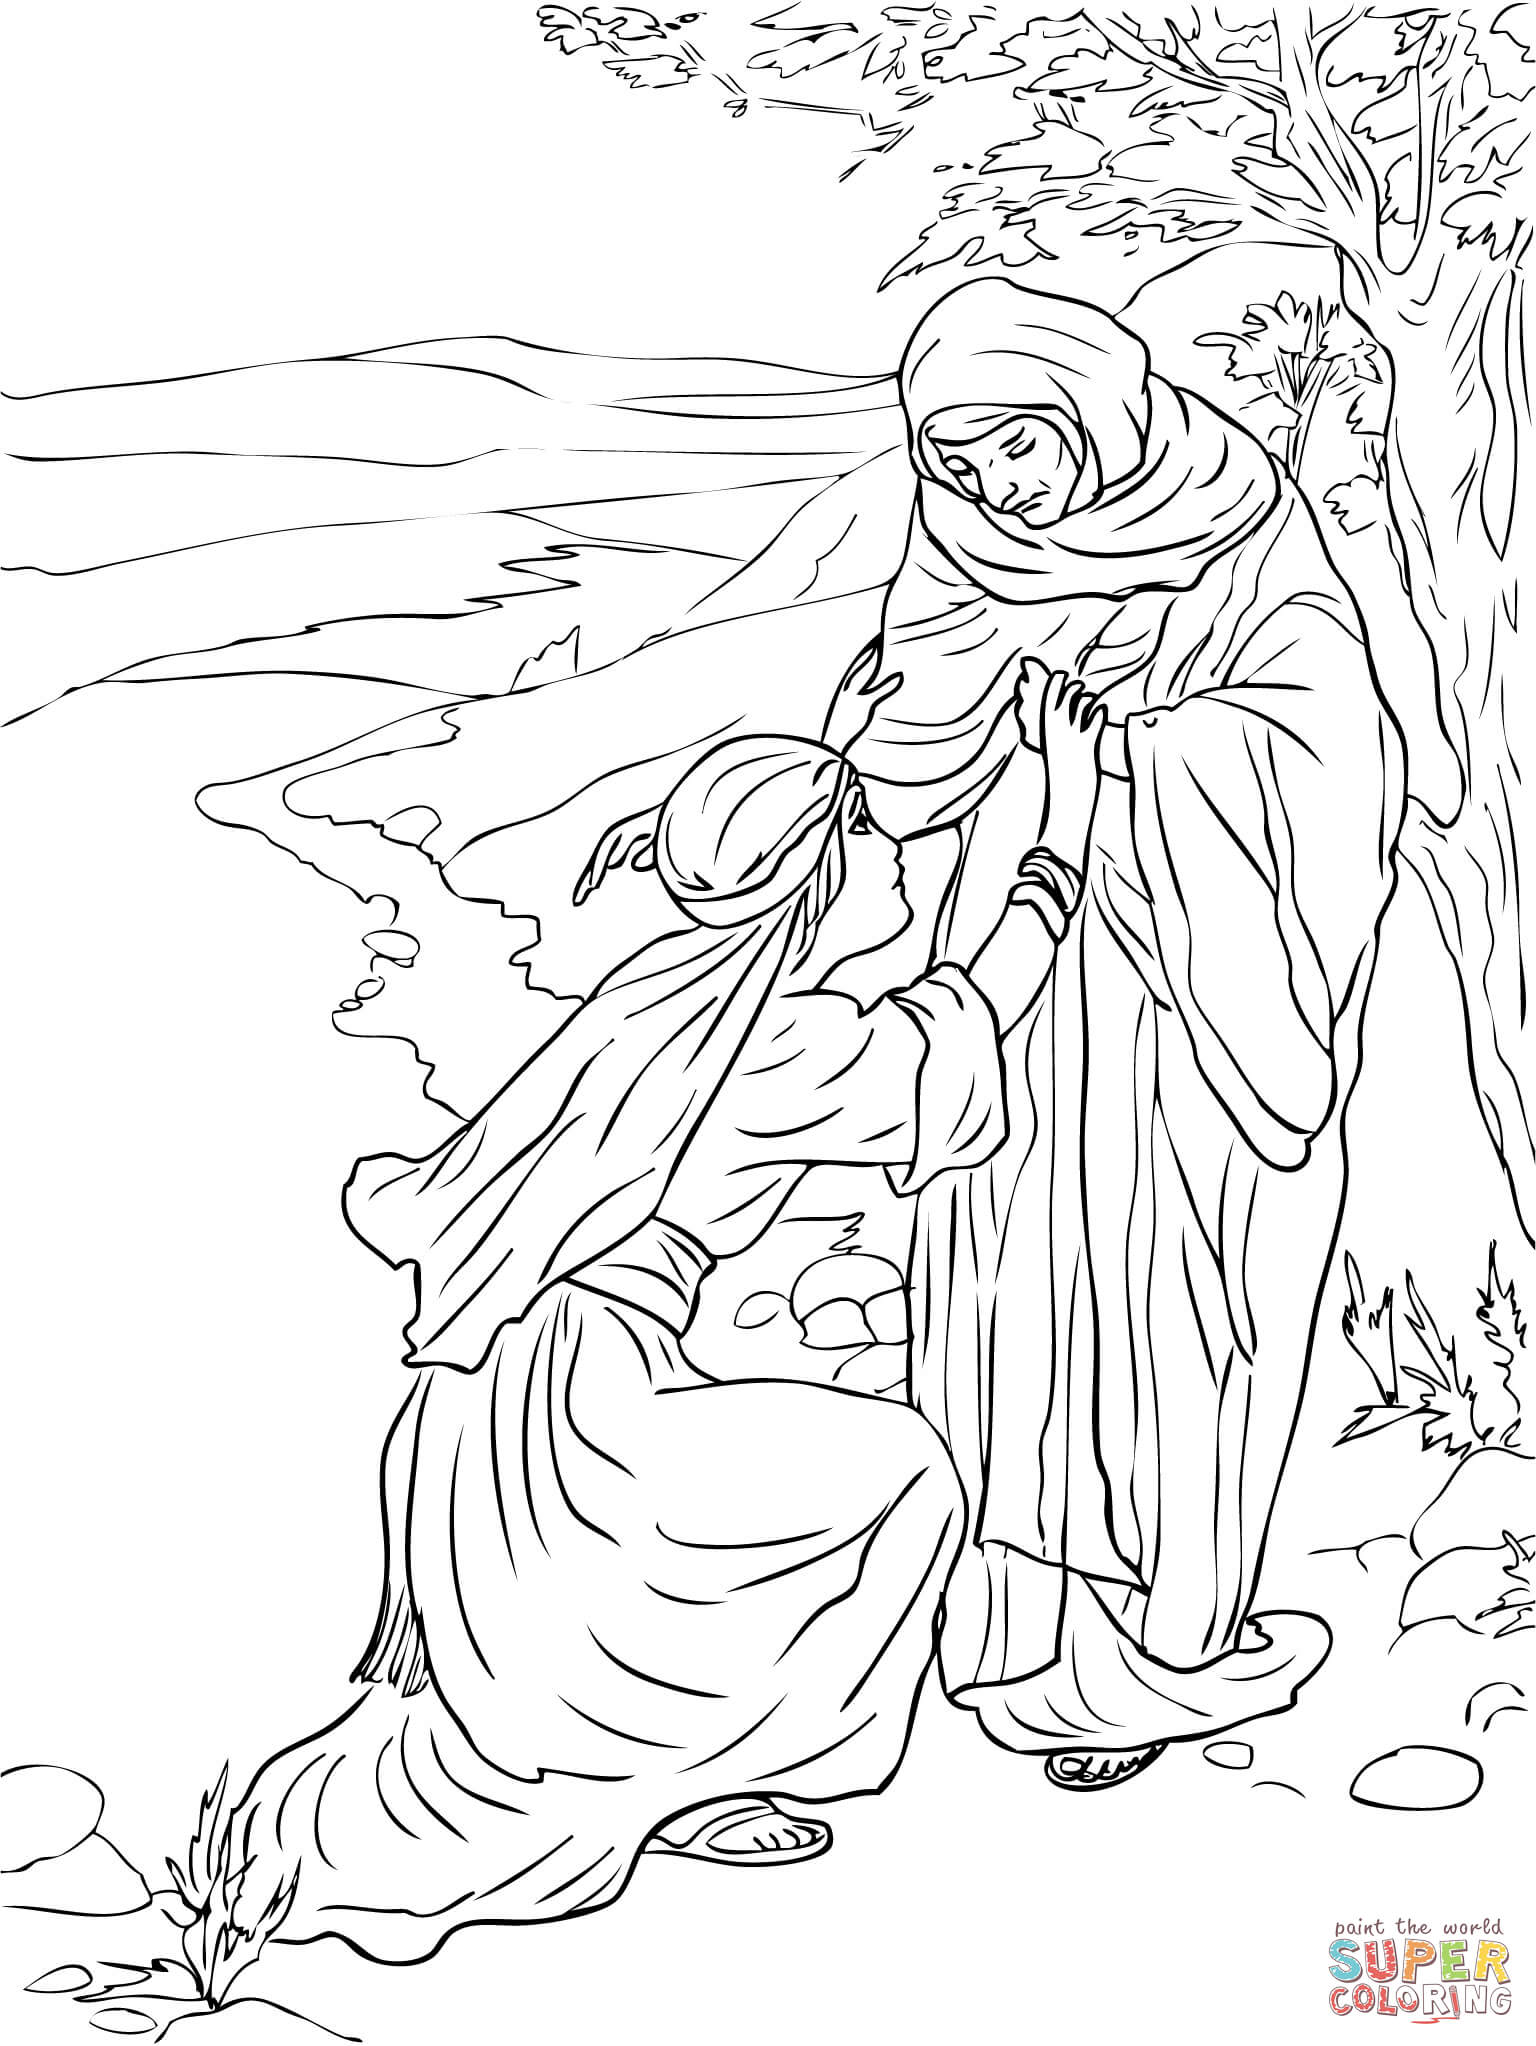 Ruth and naomi coloring page free printable coloring pages